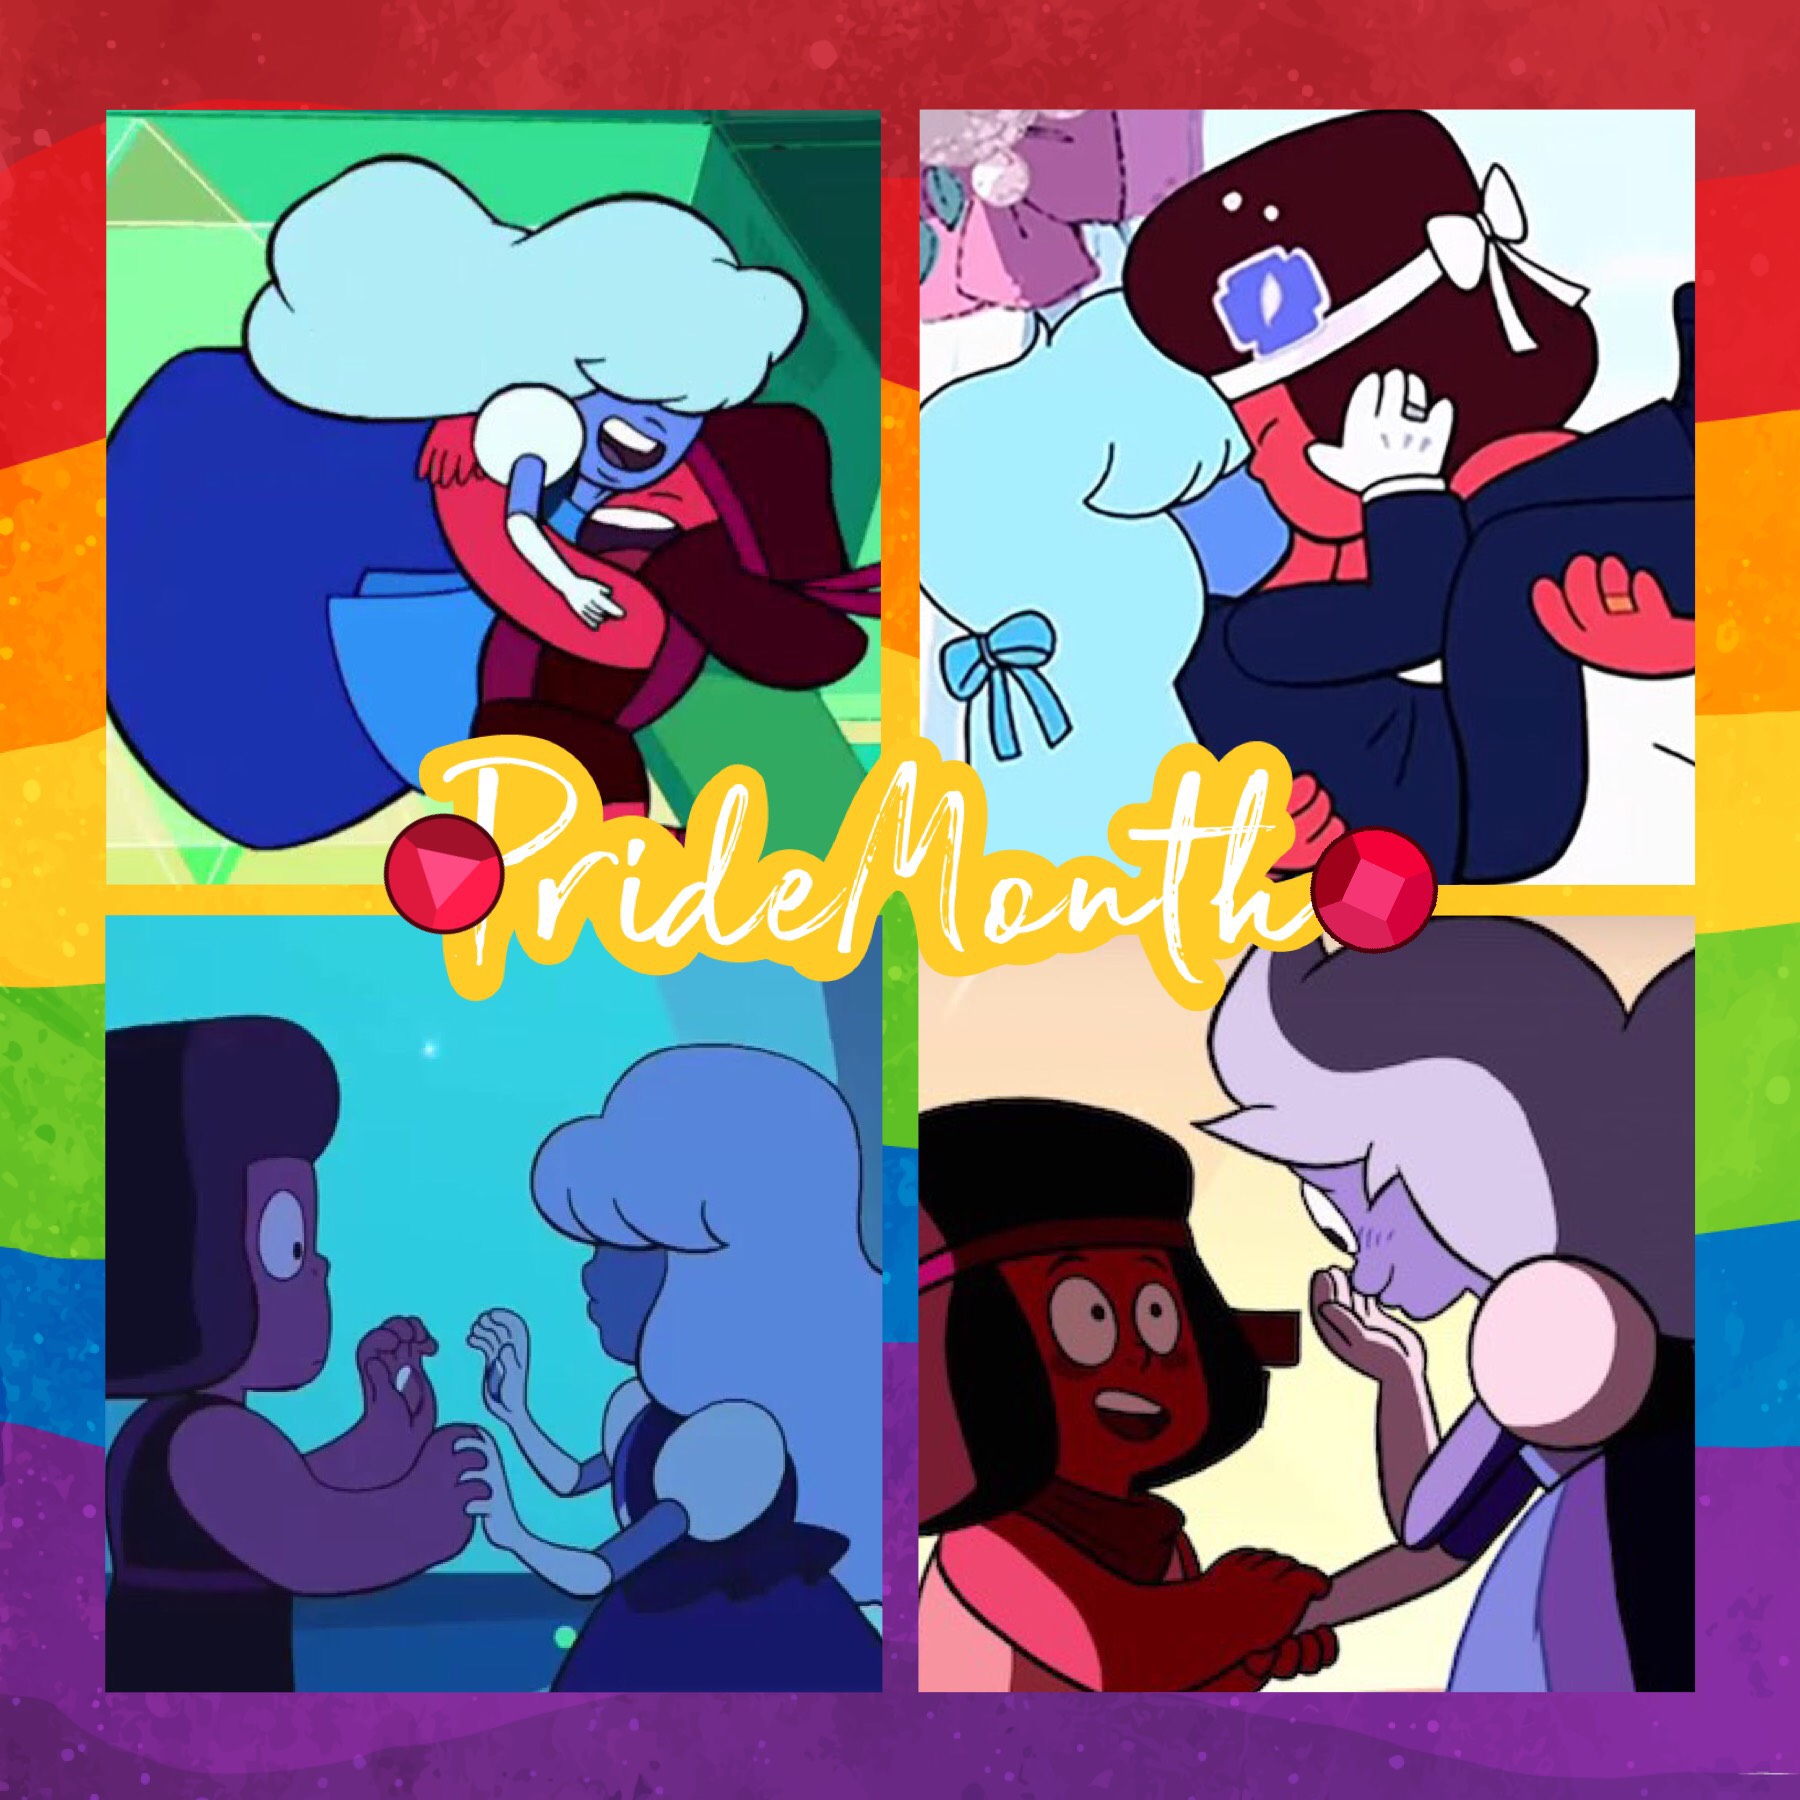 Happy pride month everyone!! I thought Ruby and Sapphire would be perfect for this template ☺️☺️🏳️‍🌈🏳️‍🌈❤️💙